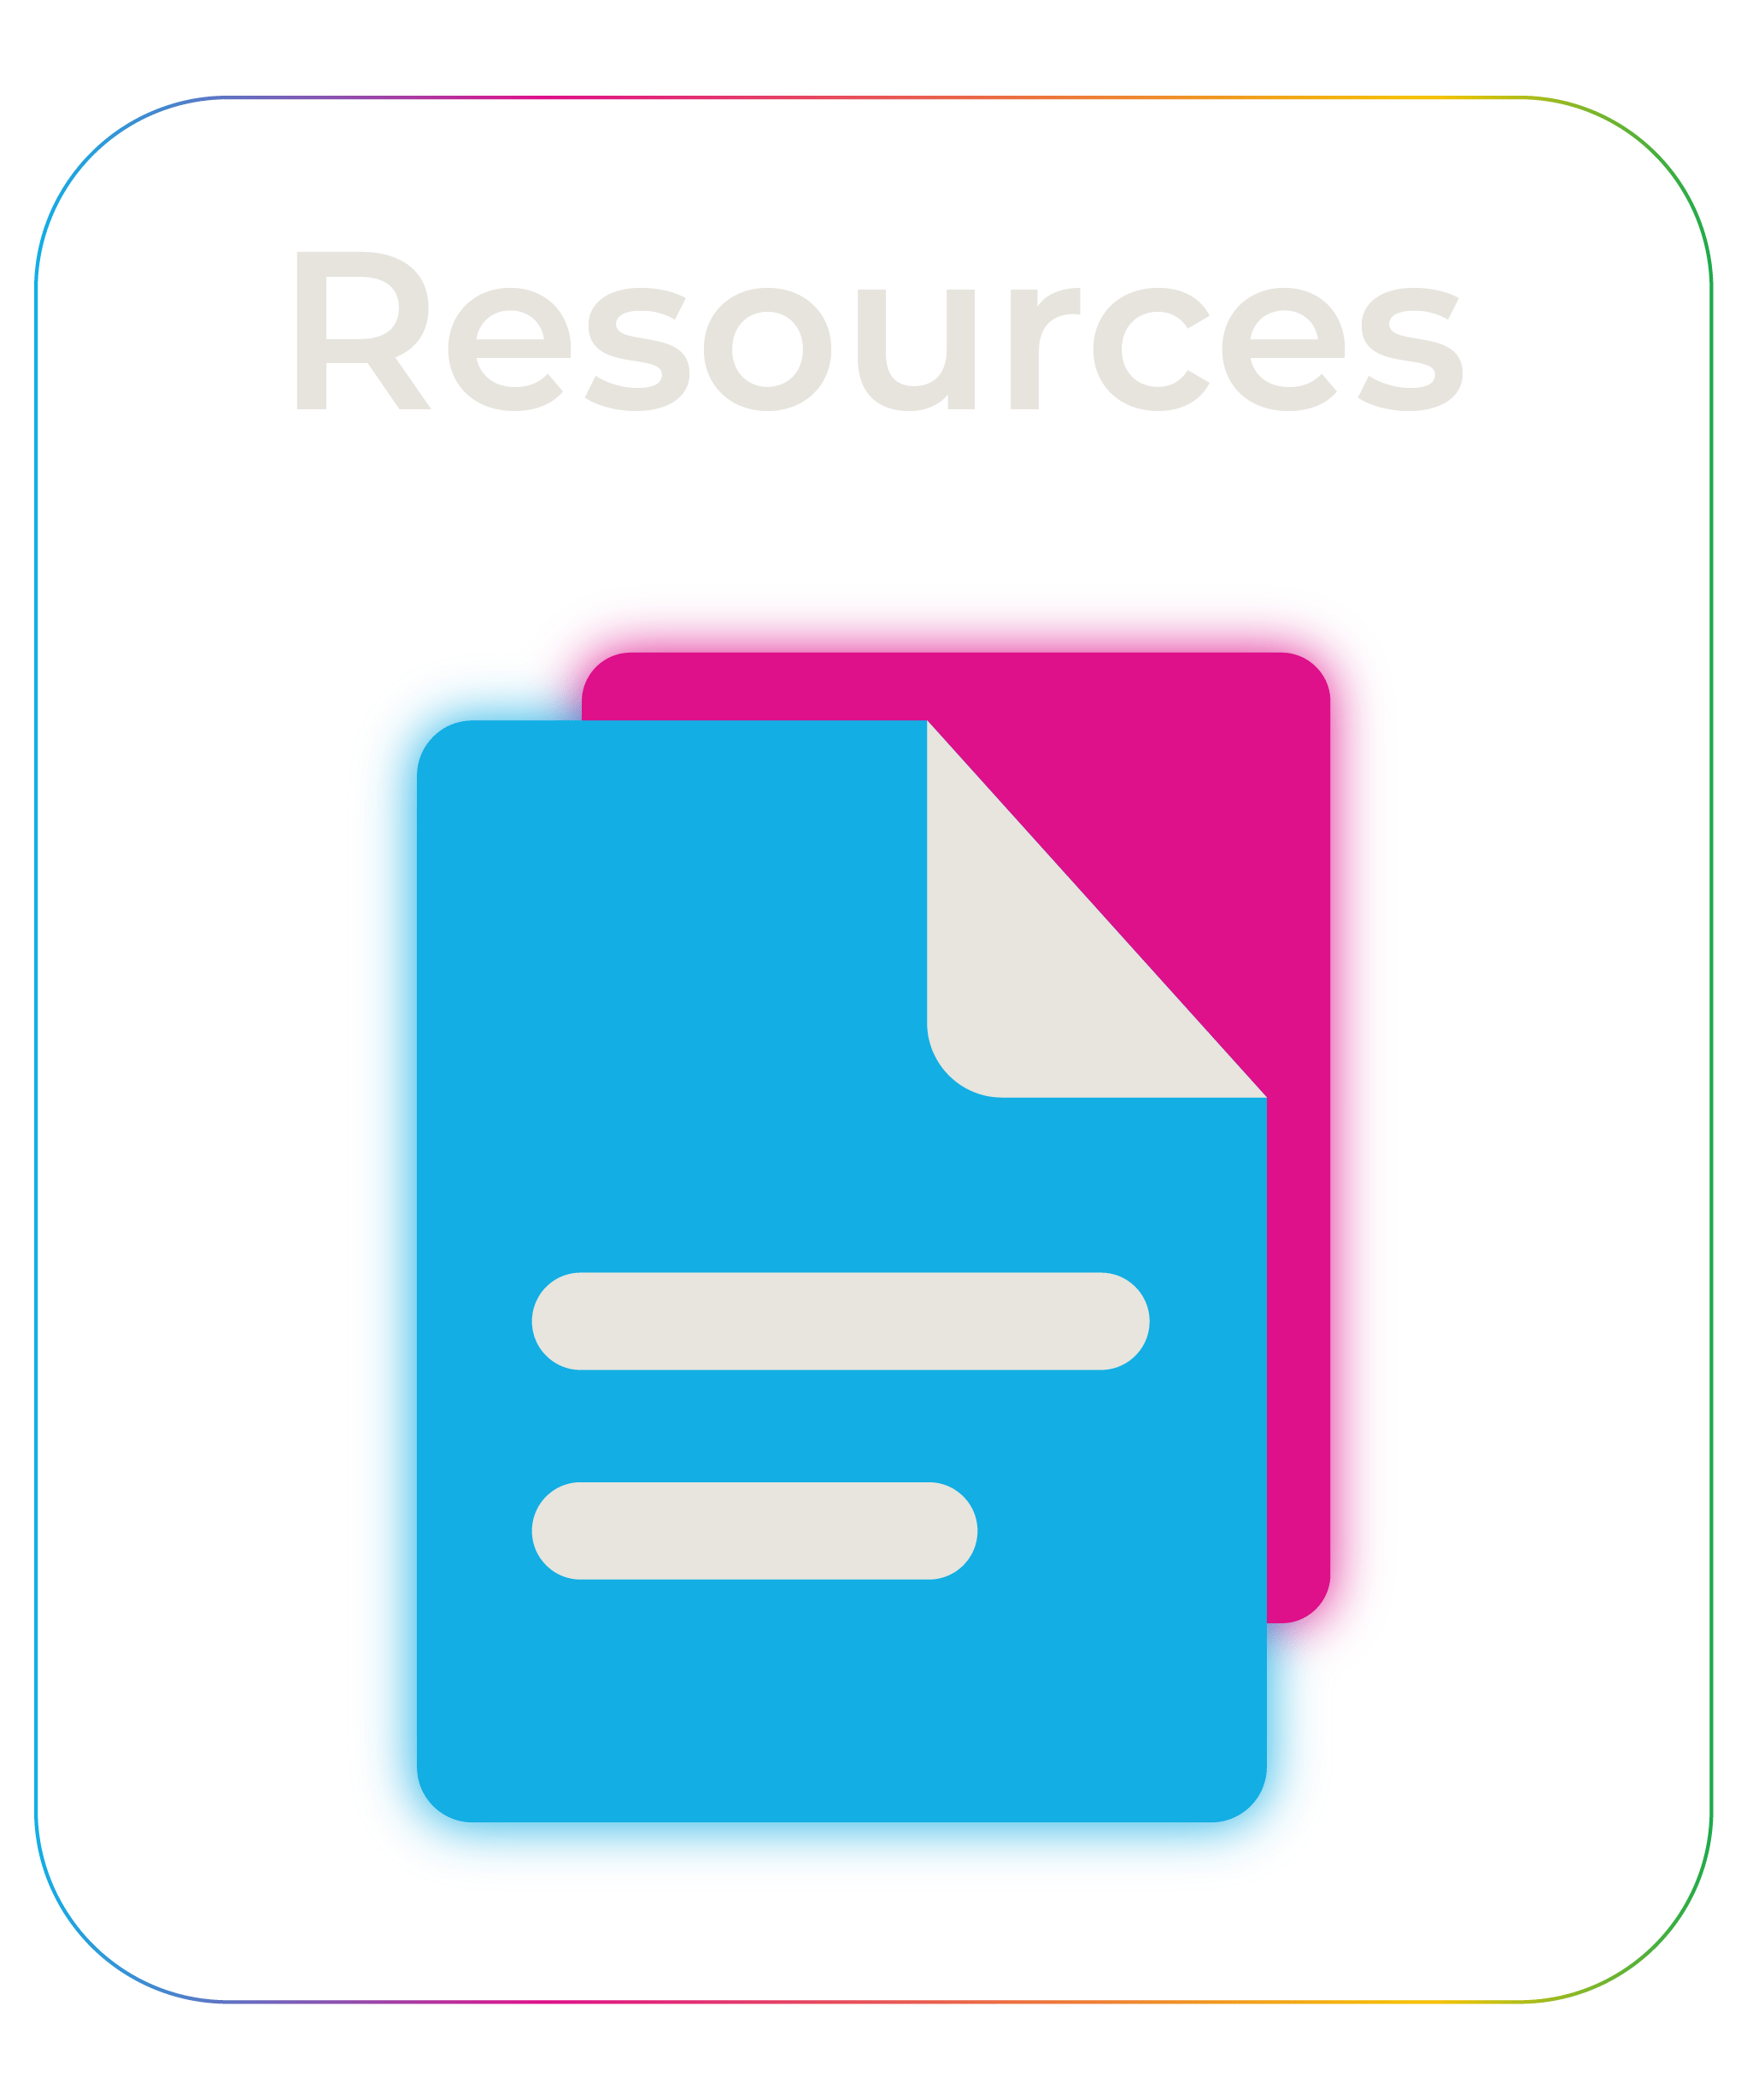 Icon of resources from the ecosystem